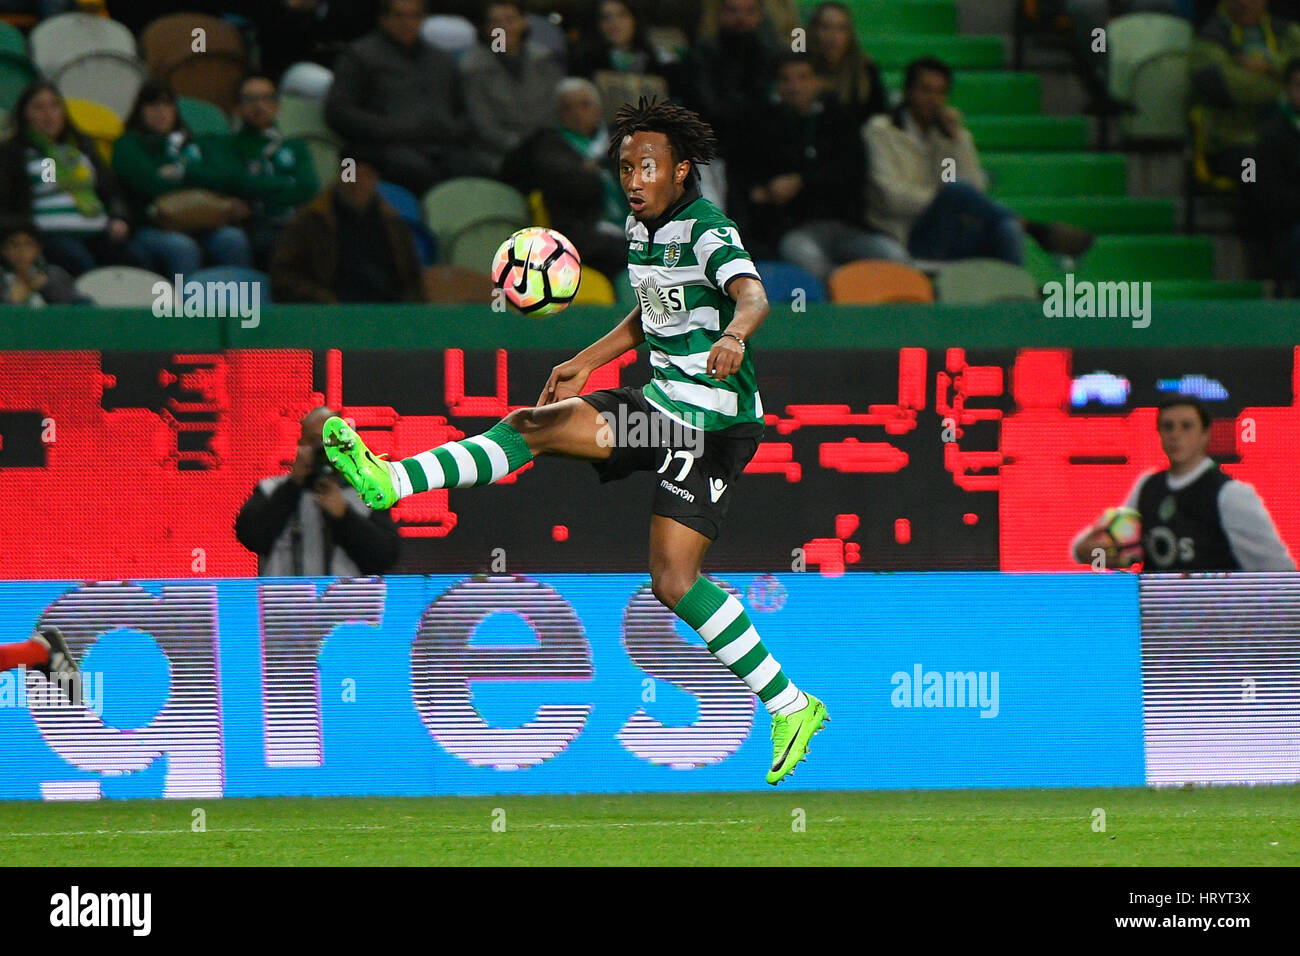 Portugal, Lisbon, Mar. 05, 2017 - FOOTBALL - Gelson Martins, Sporting player, in action during match between Sporting Clube de Portugal and Vitória Guimarães for Portuguese Football League match at Estádio Alvalade XXI, in Lisbon, Portugal. Credit: Bruno de Carvalho/Alamy Live News Stock Photo